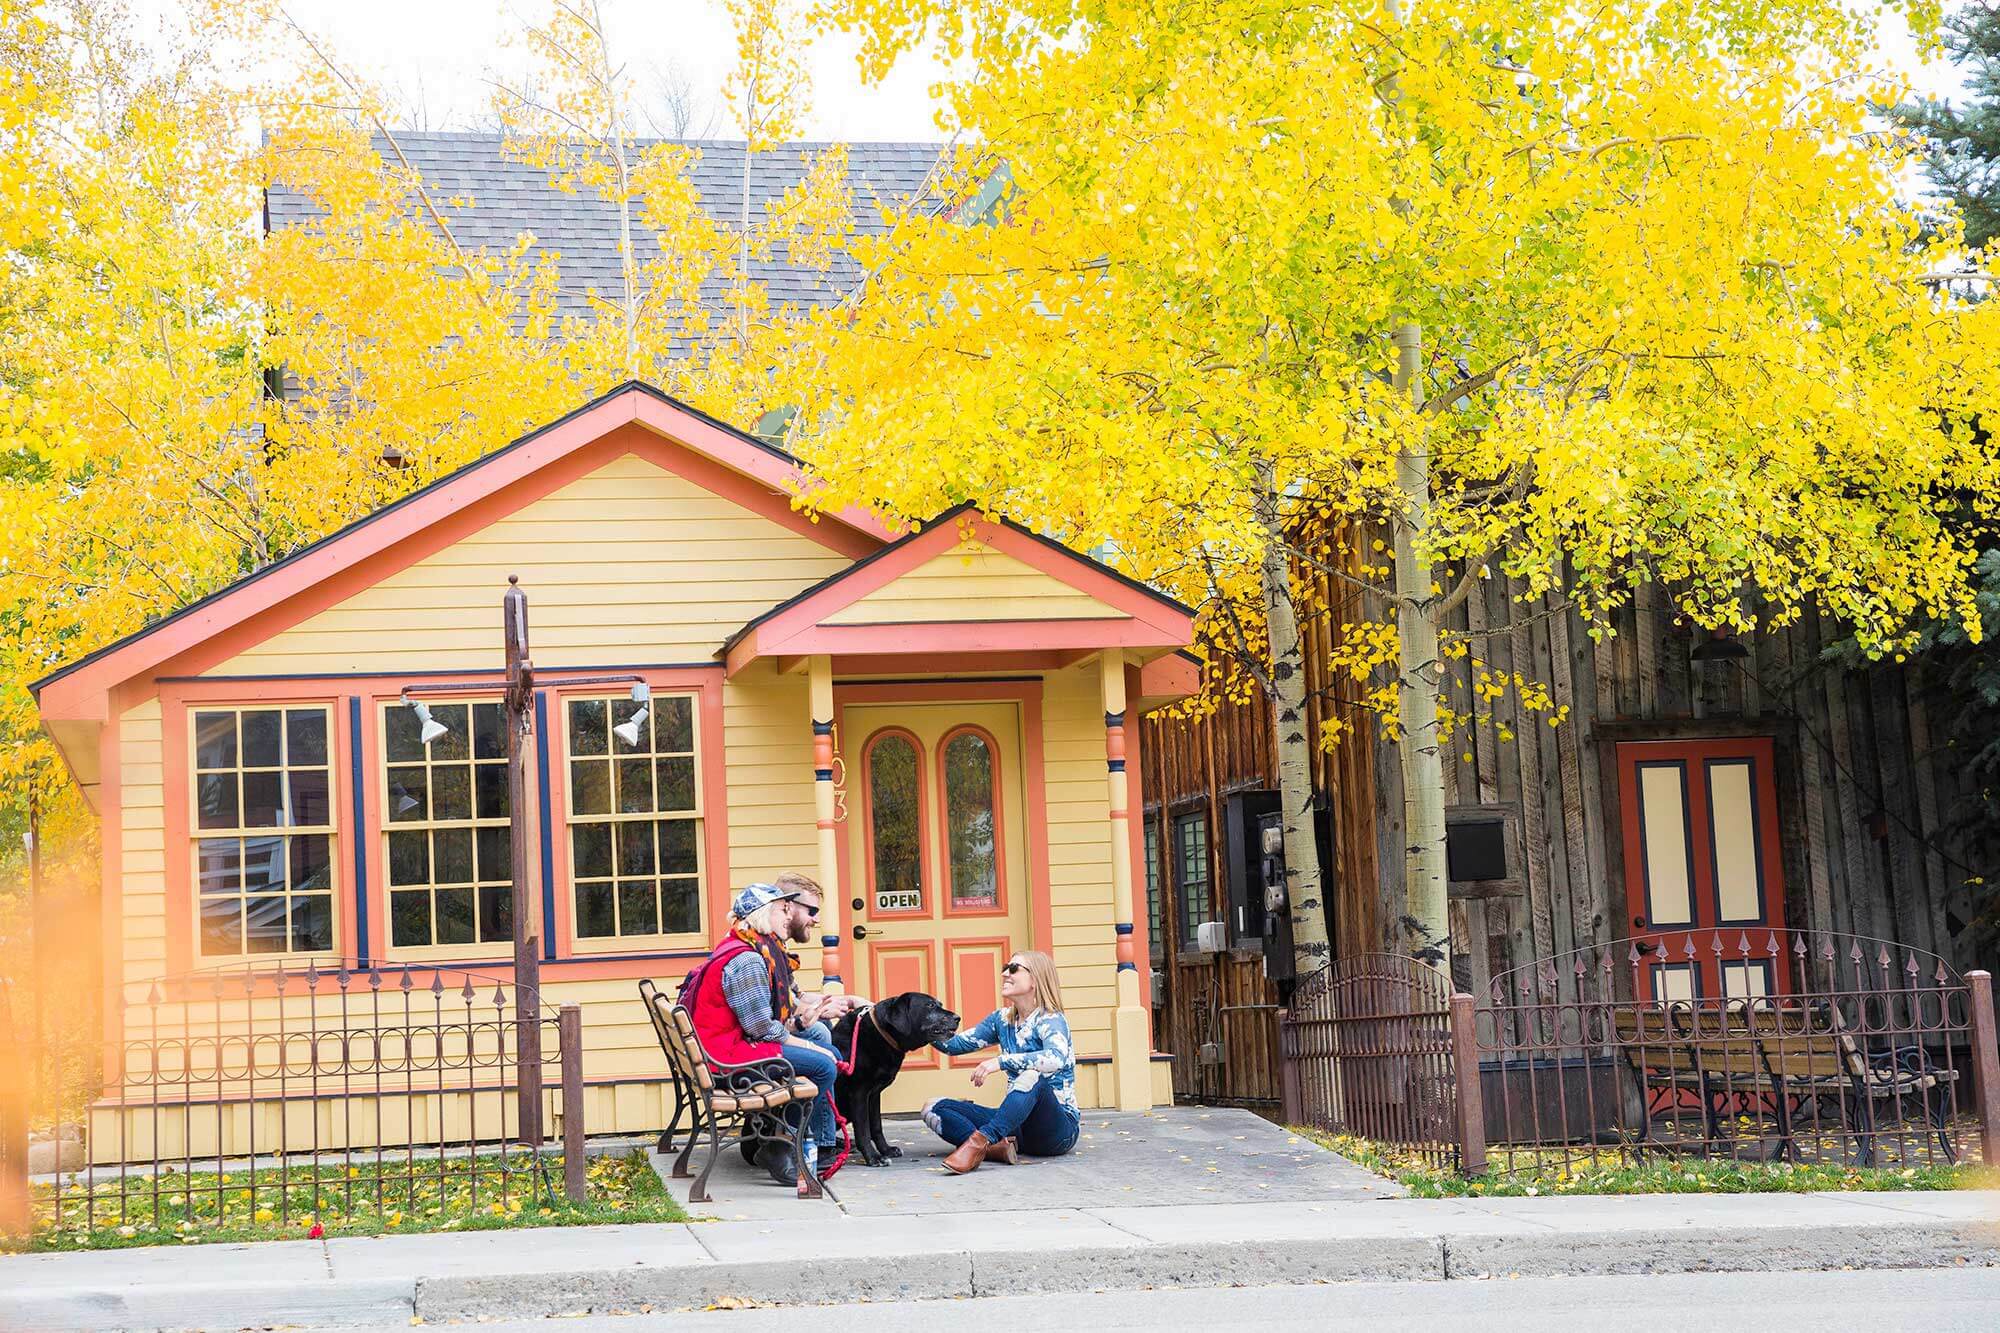 Group of friends sit and relax near historic house in Breckenridge, CO